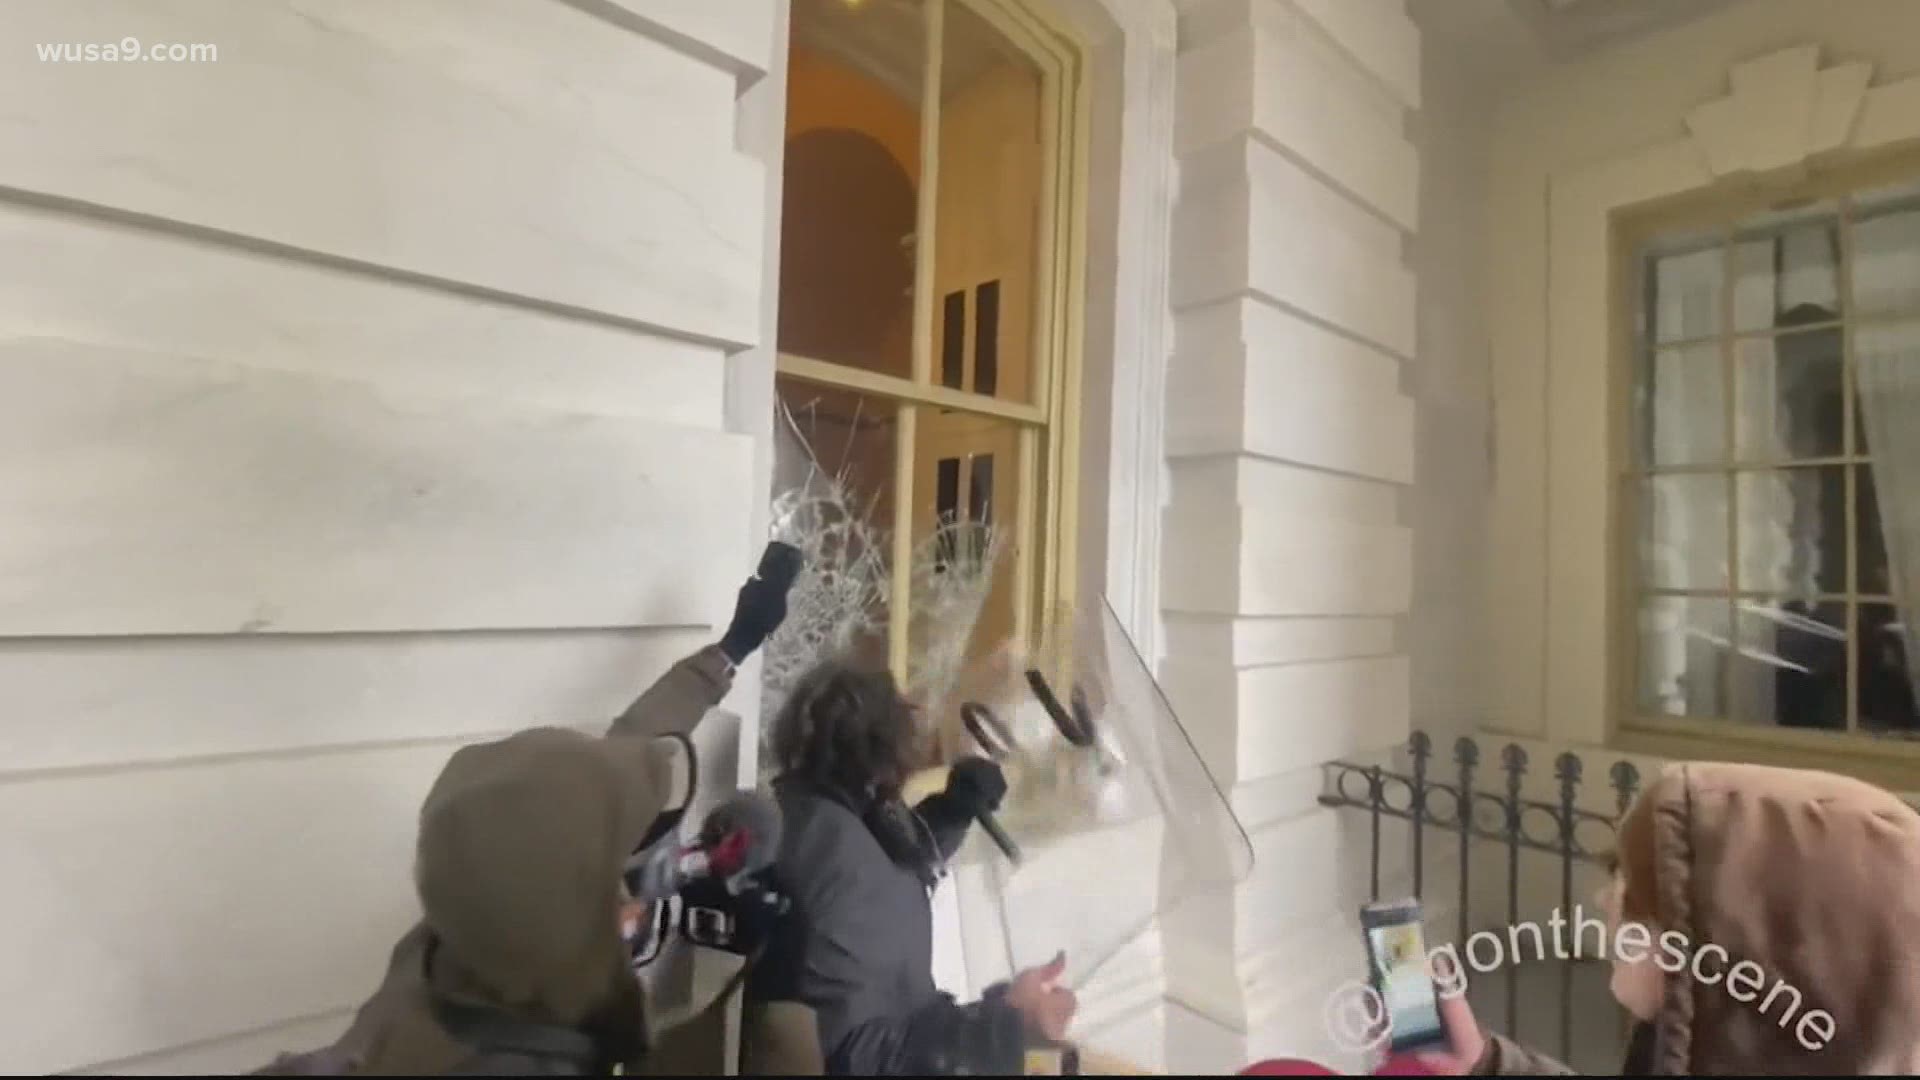 Three new clips released to WUSA9 and other media organizations appear to show Proud Boys preparing to storm the U.S. Capitol building on January 6.